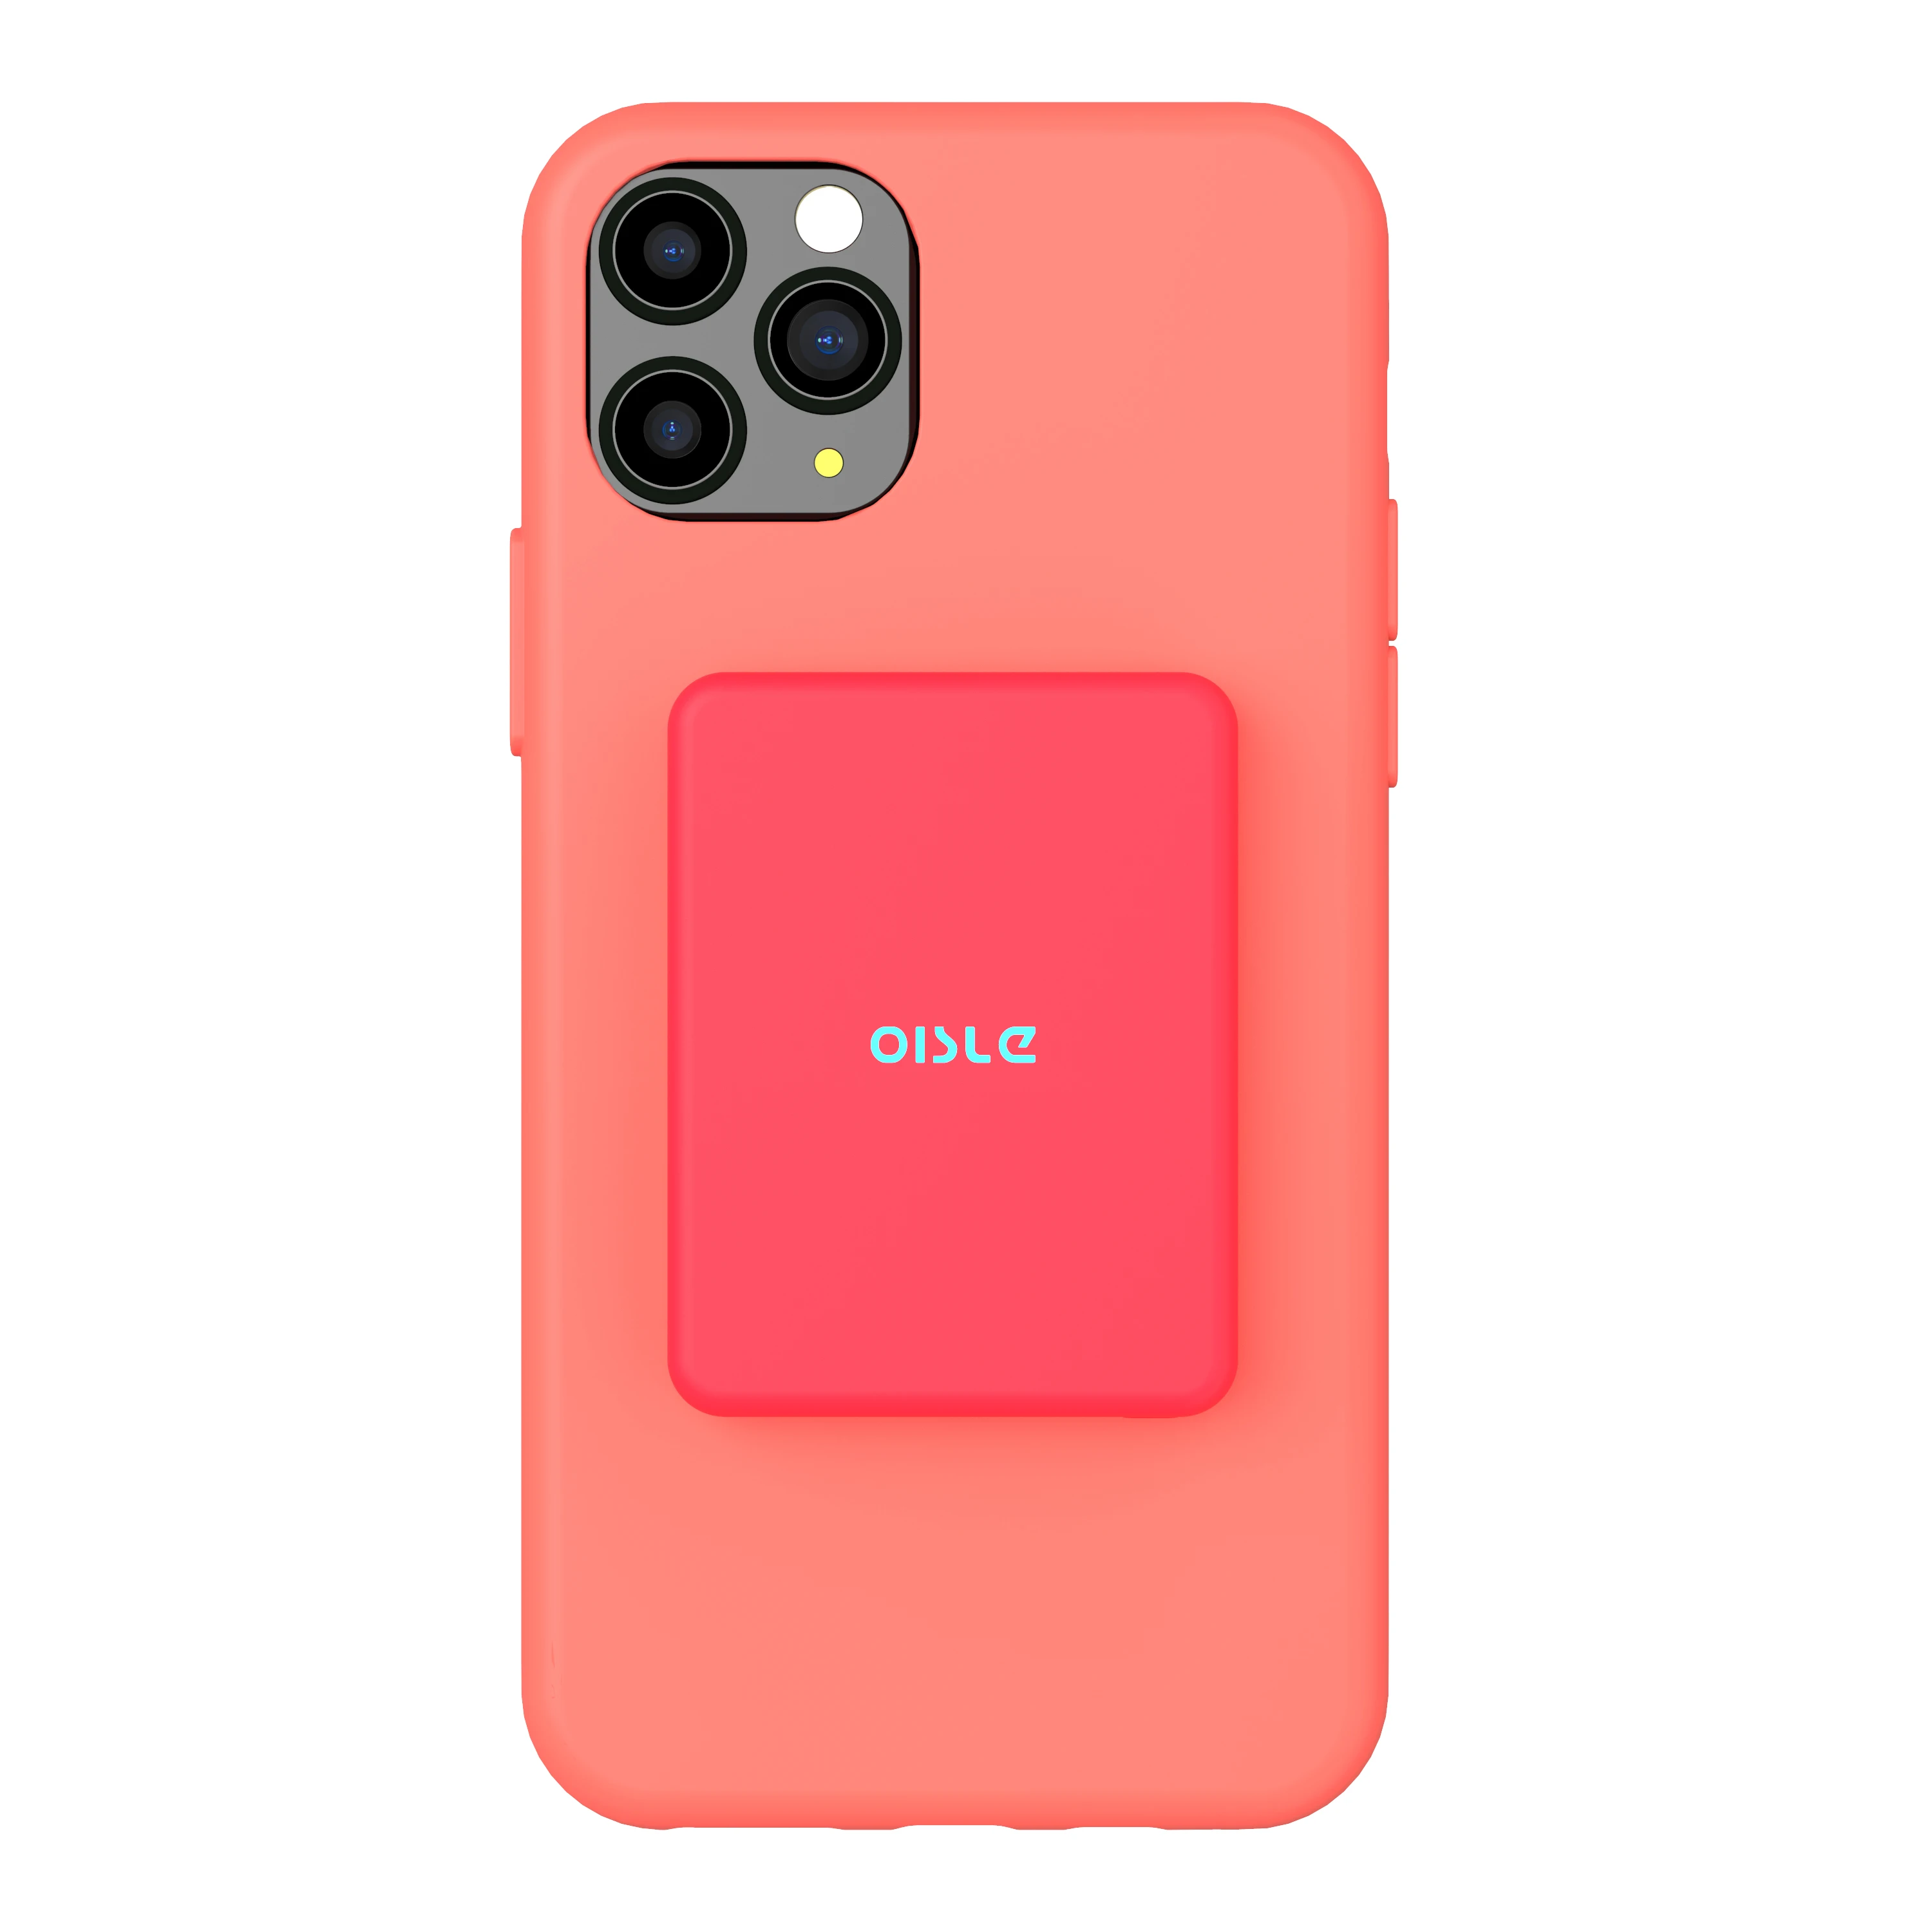 

OISLE Fashion Mini Portable Battery Bank Fast Charger Power Bank For iPhone 12/13/mini/pro/pro max, White, black, blue, pink, red